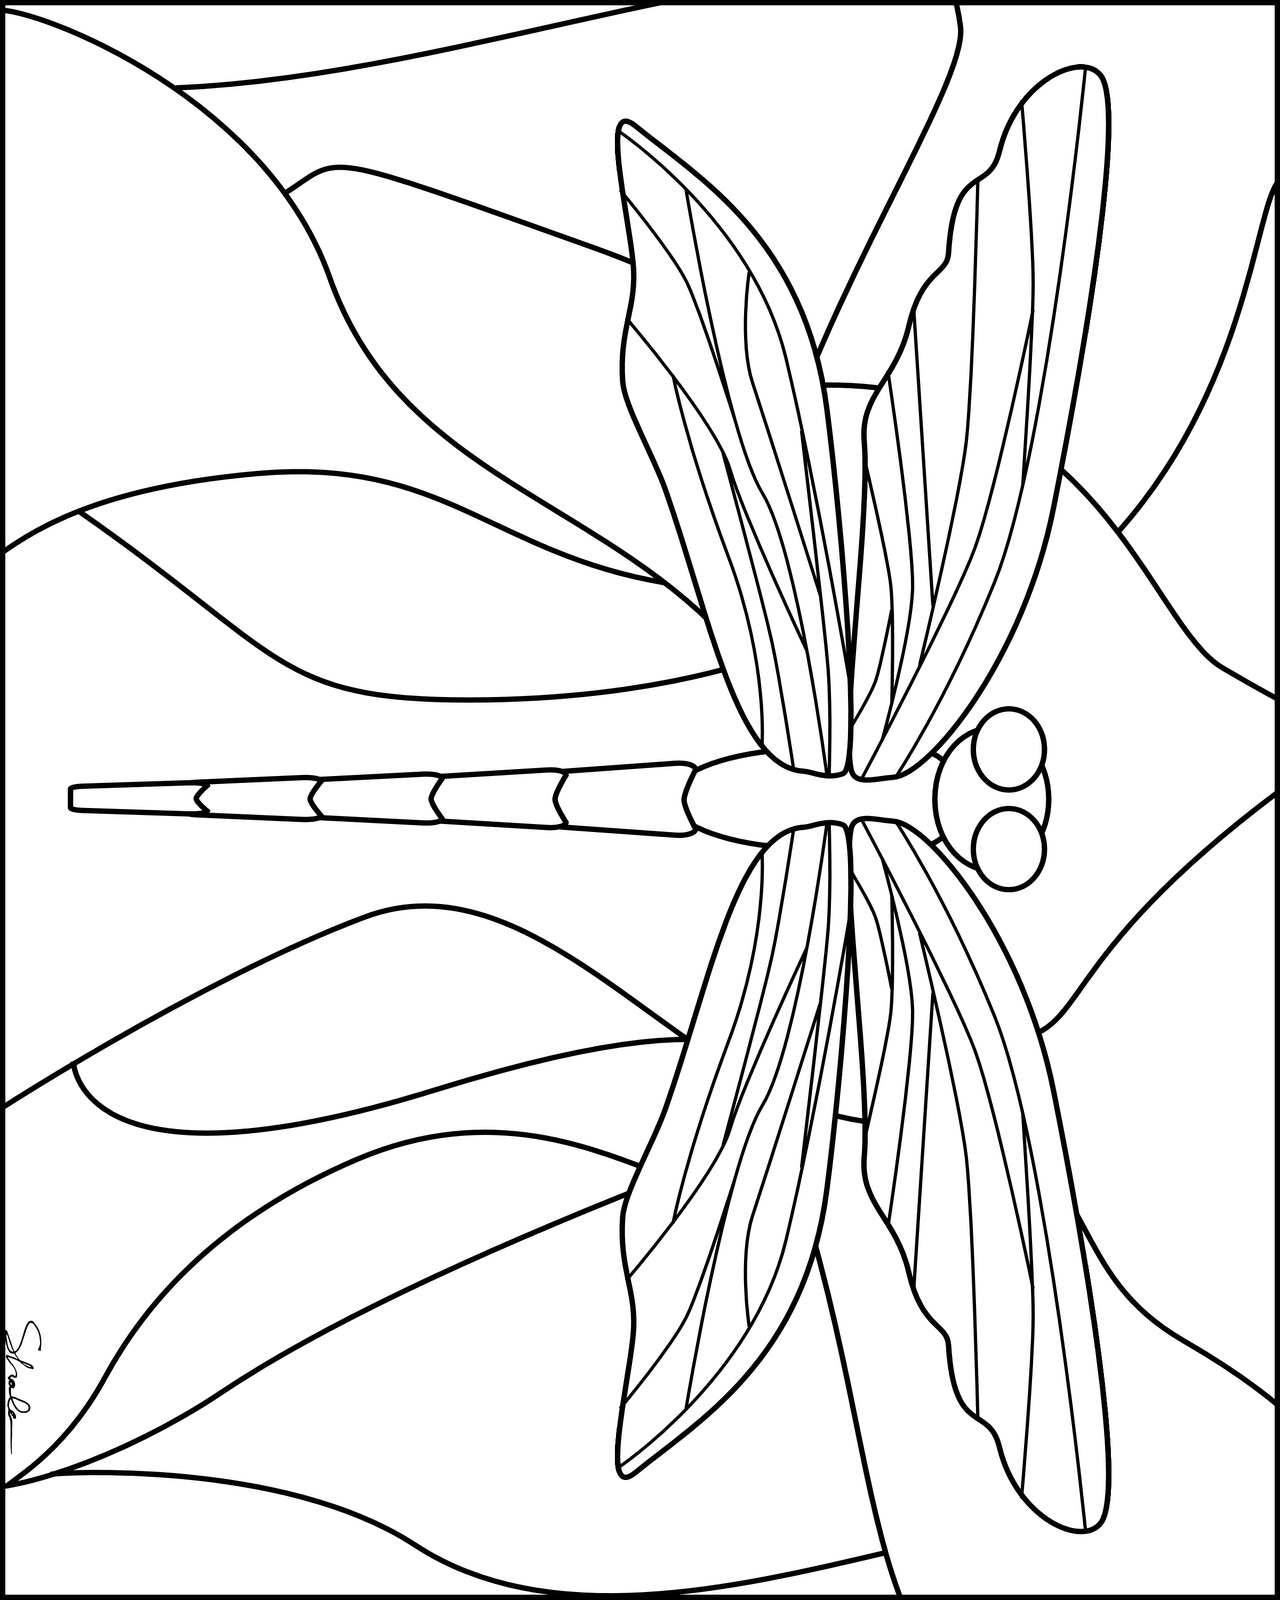 Coloring Dragonfly Cartoon Coloring Pages